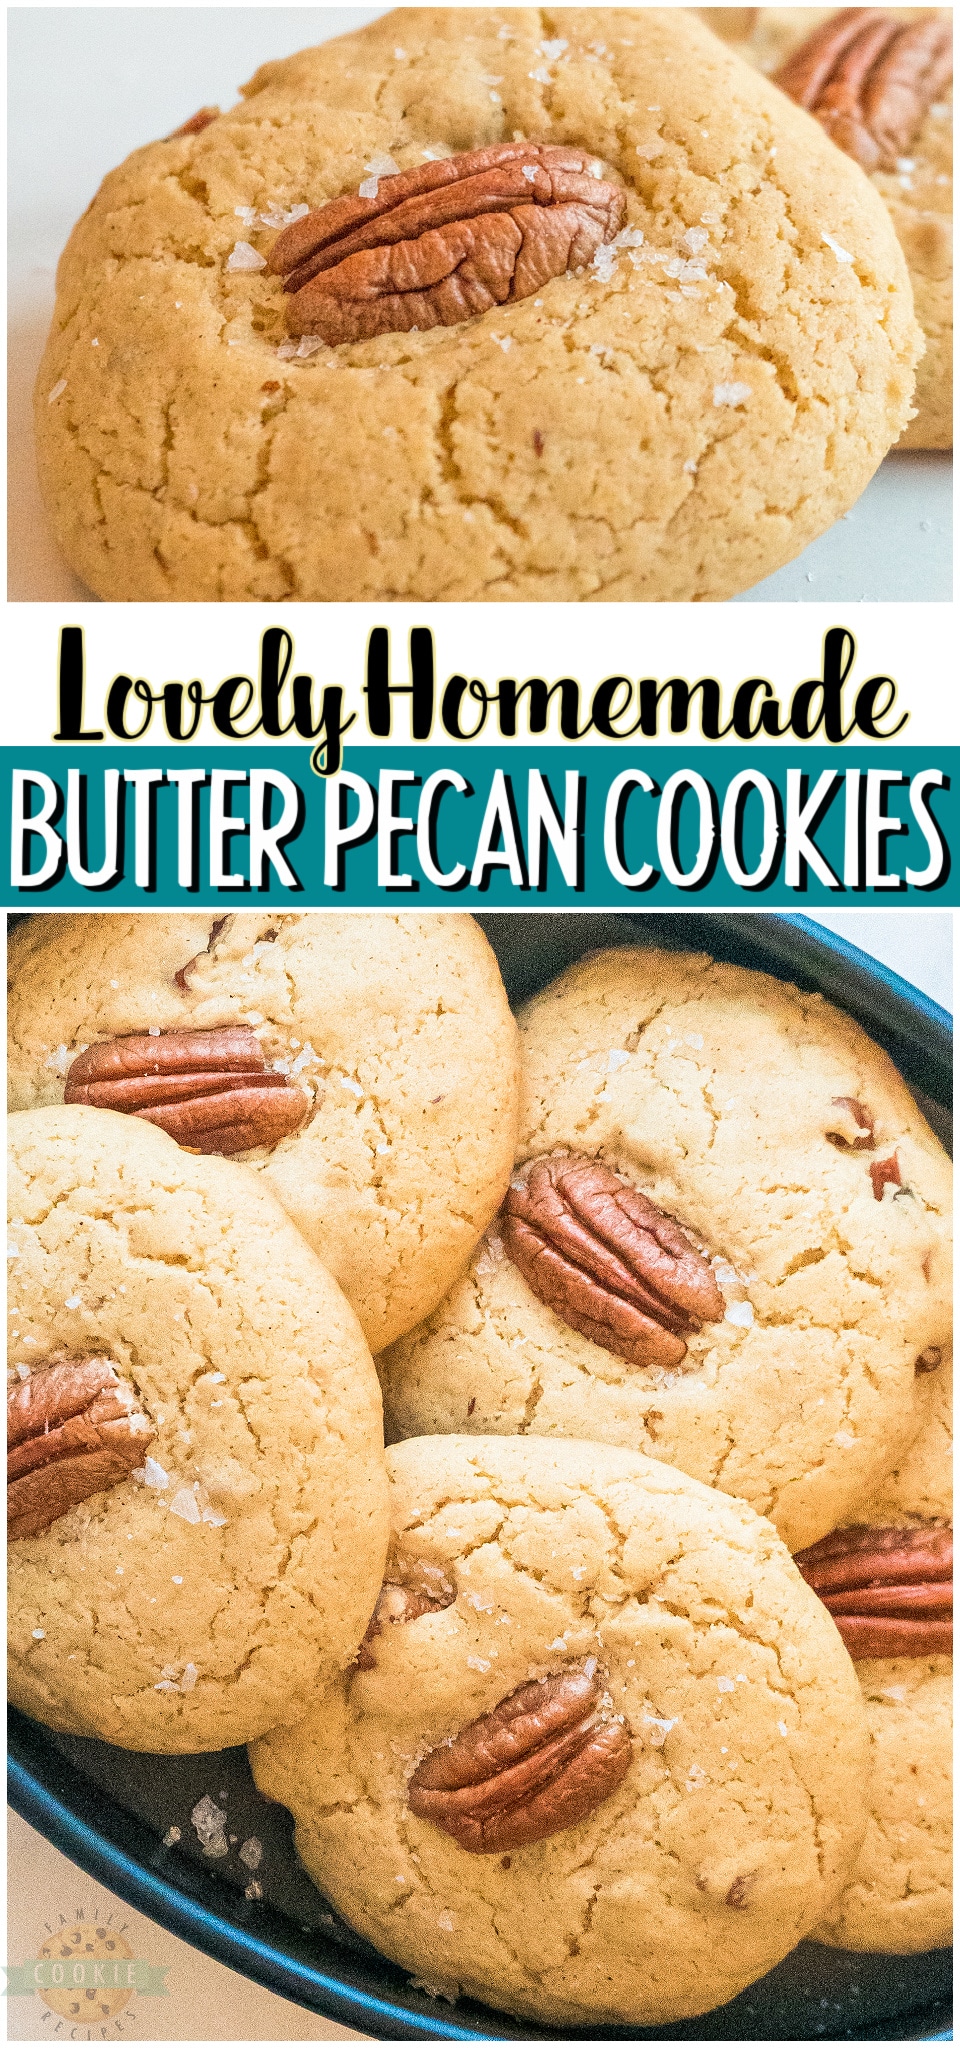 Butter Pecan Cookies are soft & buttery with fantastic vanilla & cinnamon flavors. Easy cookie recipe for anyone who loves butter pecan ice cream!